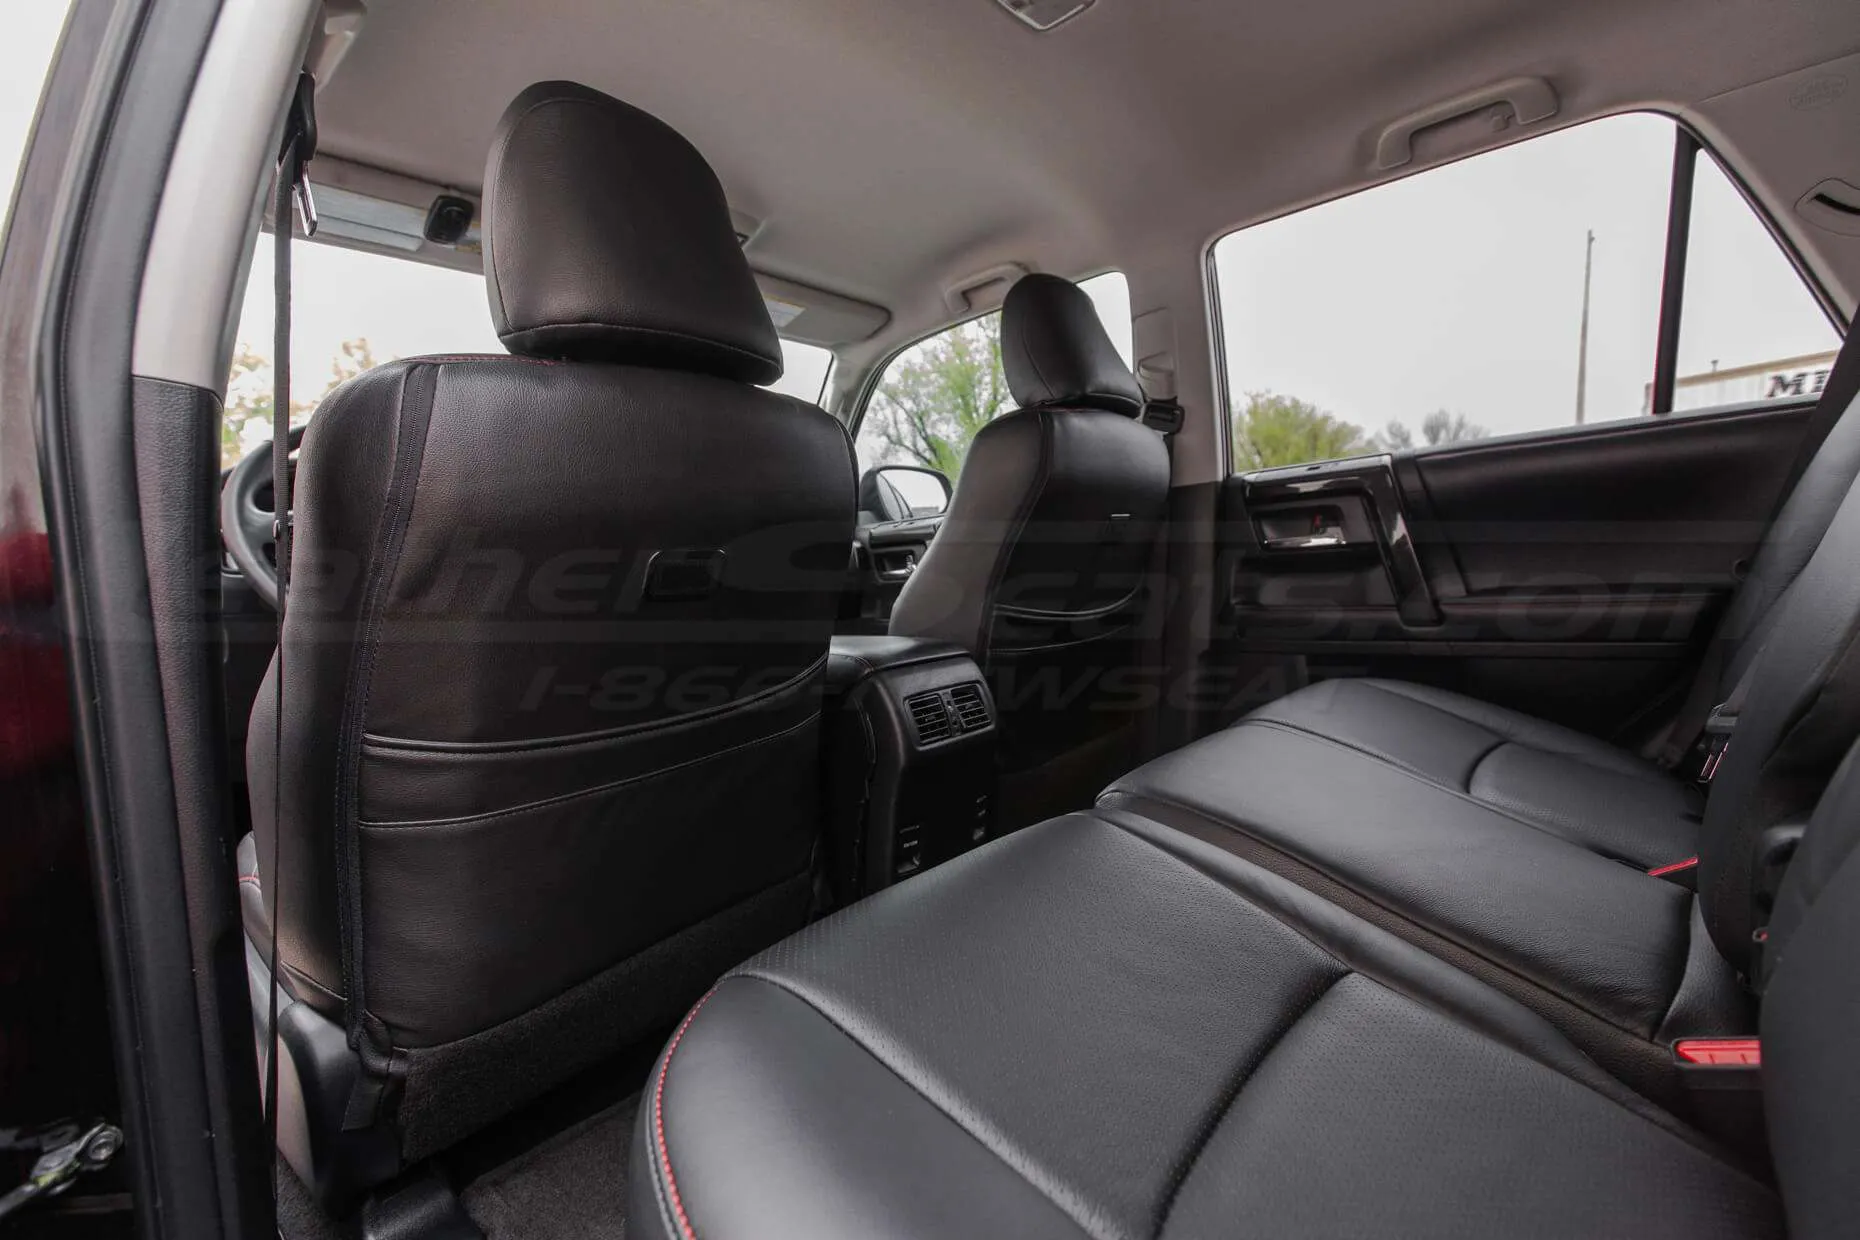 2010-2018 Toyota 4runner Leather Seats - Black - Back view of front seats